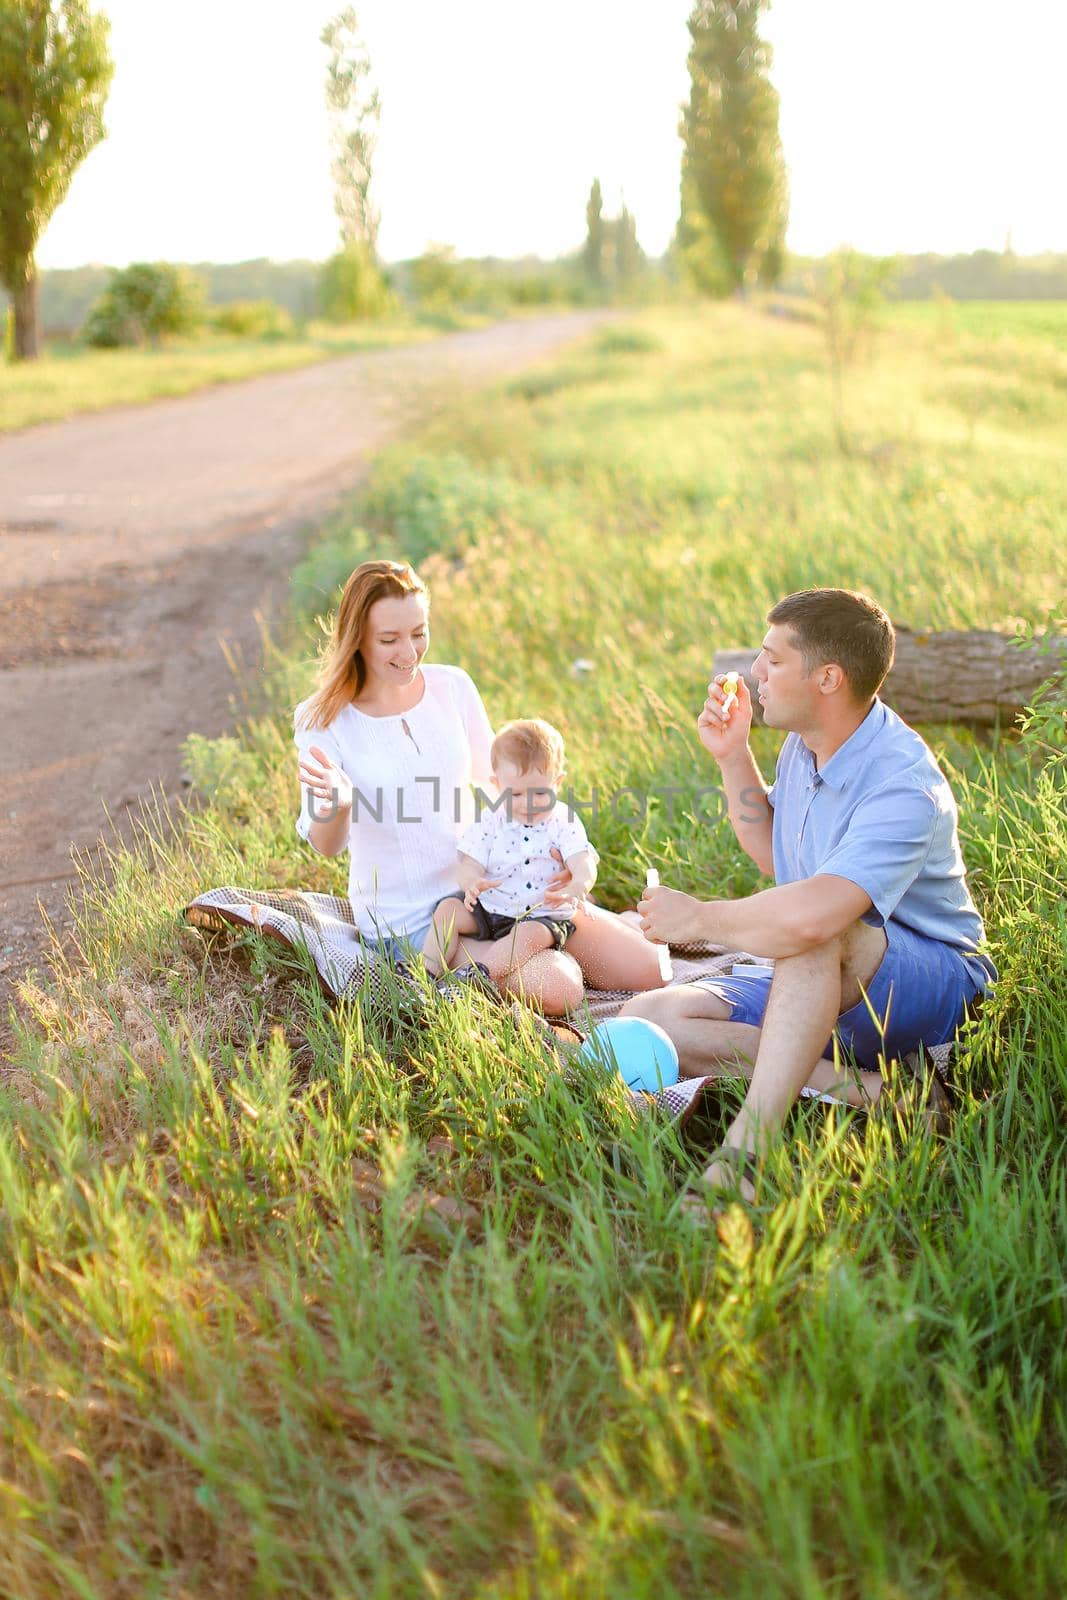 Young father and blonde cute mother sitting on grass with little baby and blowing bubbles. Concept of picnic with child and resting on nature.